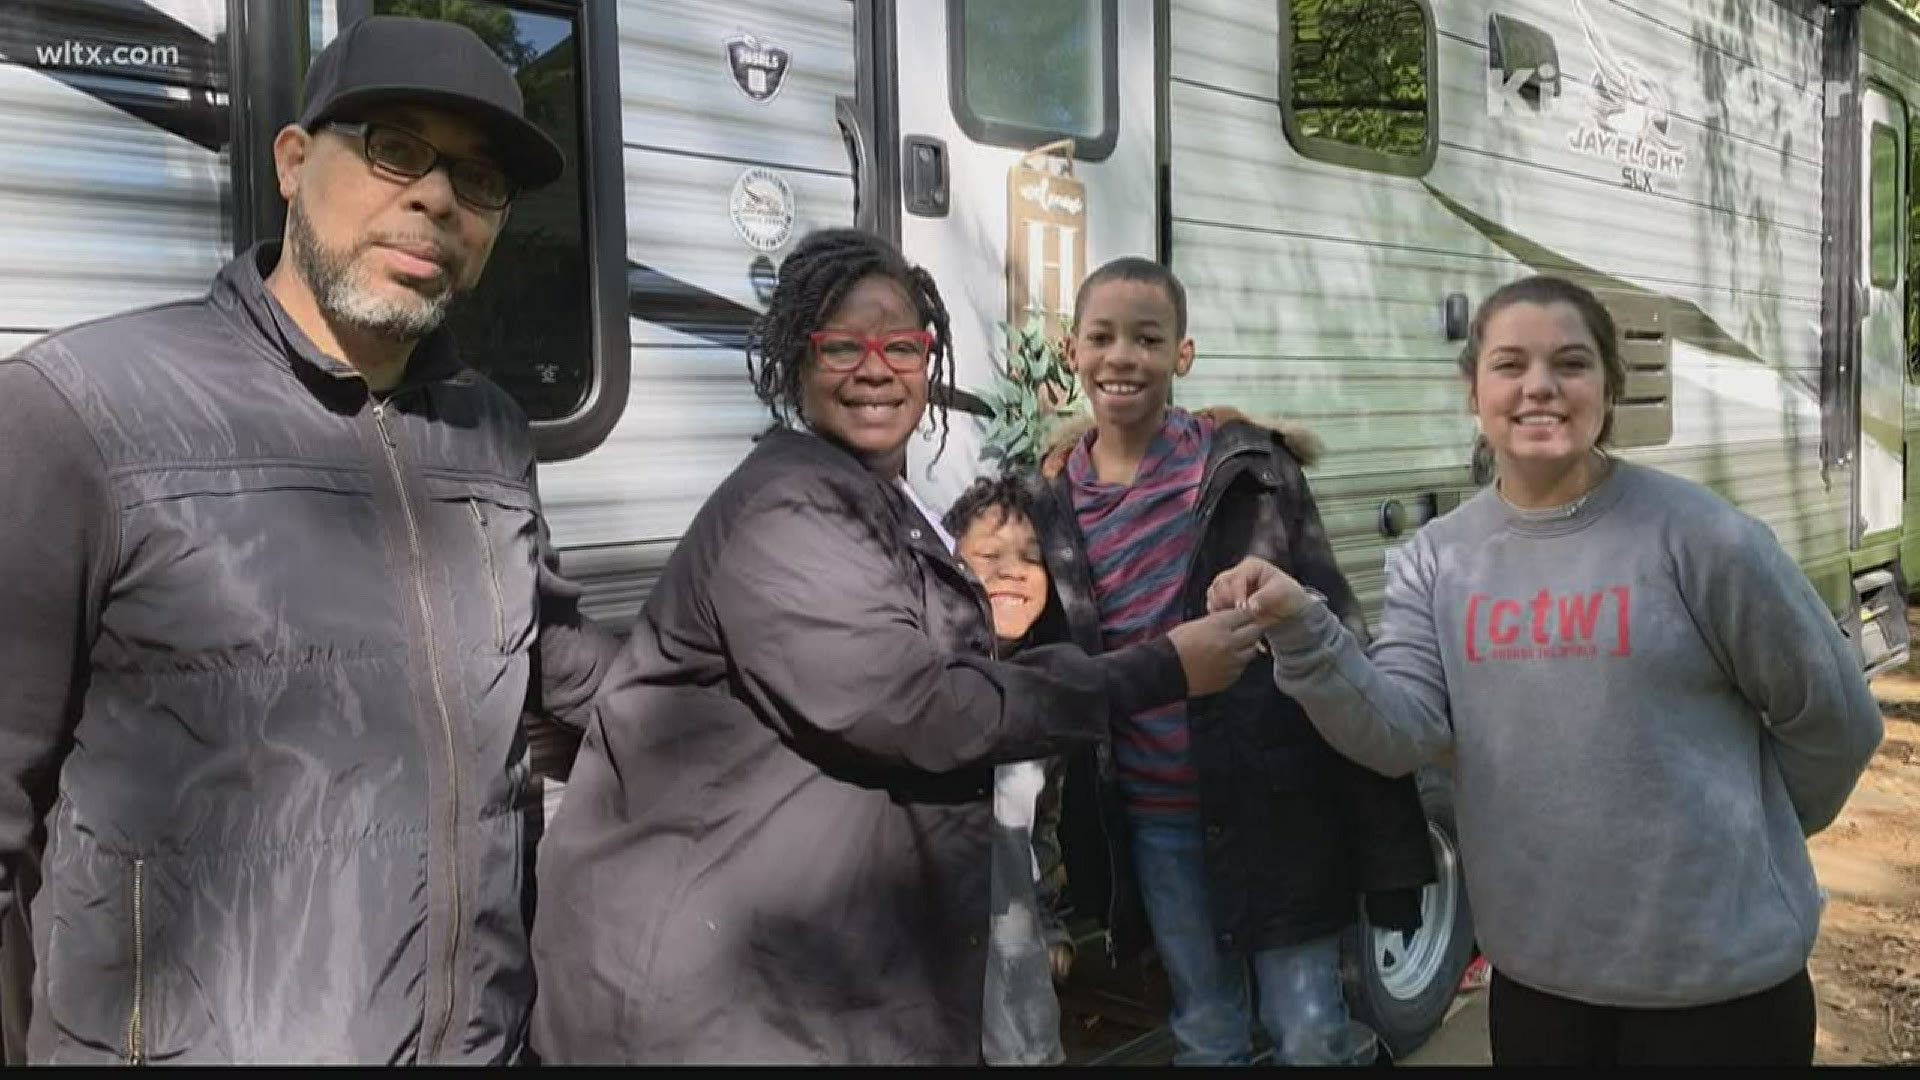 People are sharing their RVs to give health care workers a safe place to stay as they fight the coronavirus.